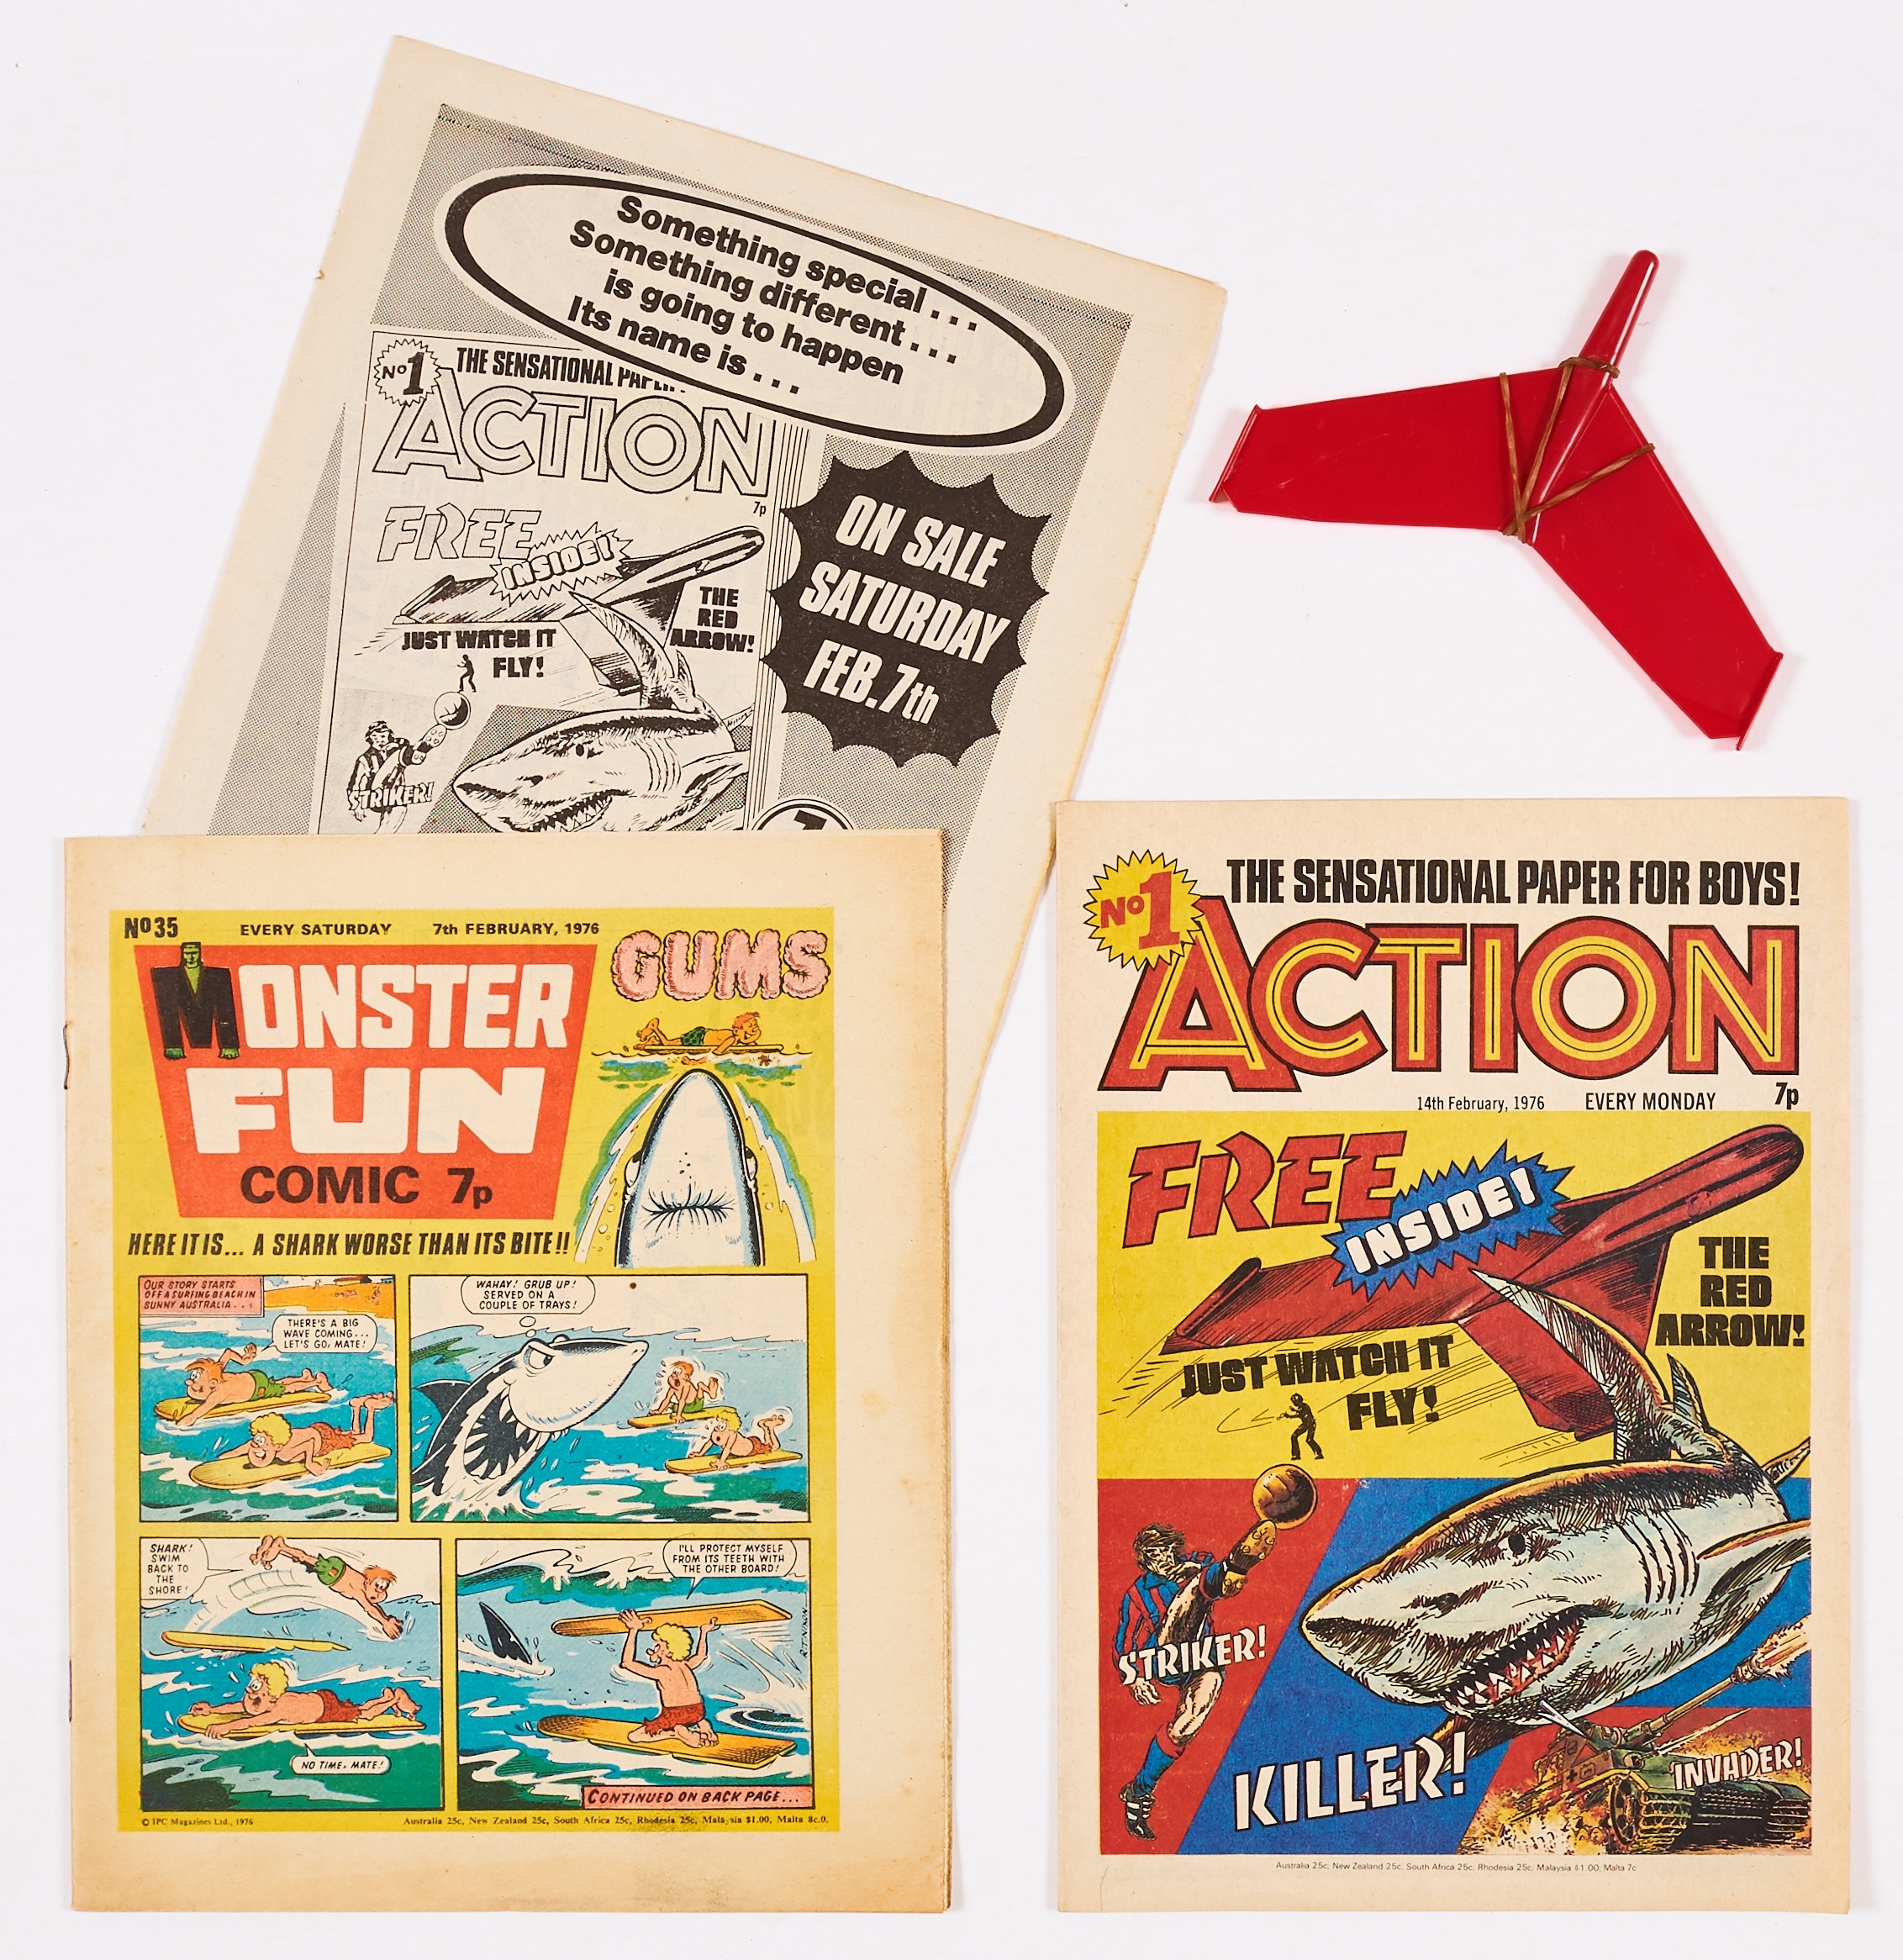 Action No 1 (1976). With free gift Red Arrow. With Monster Fun No 35 showing centre four pg ad for